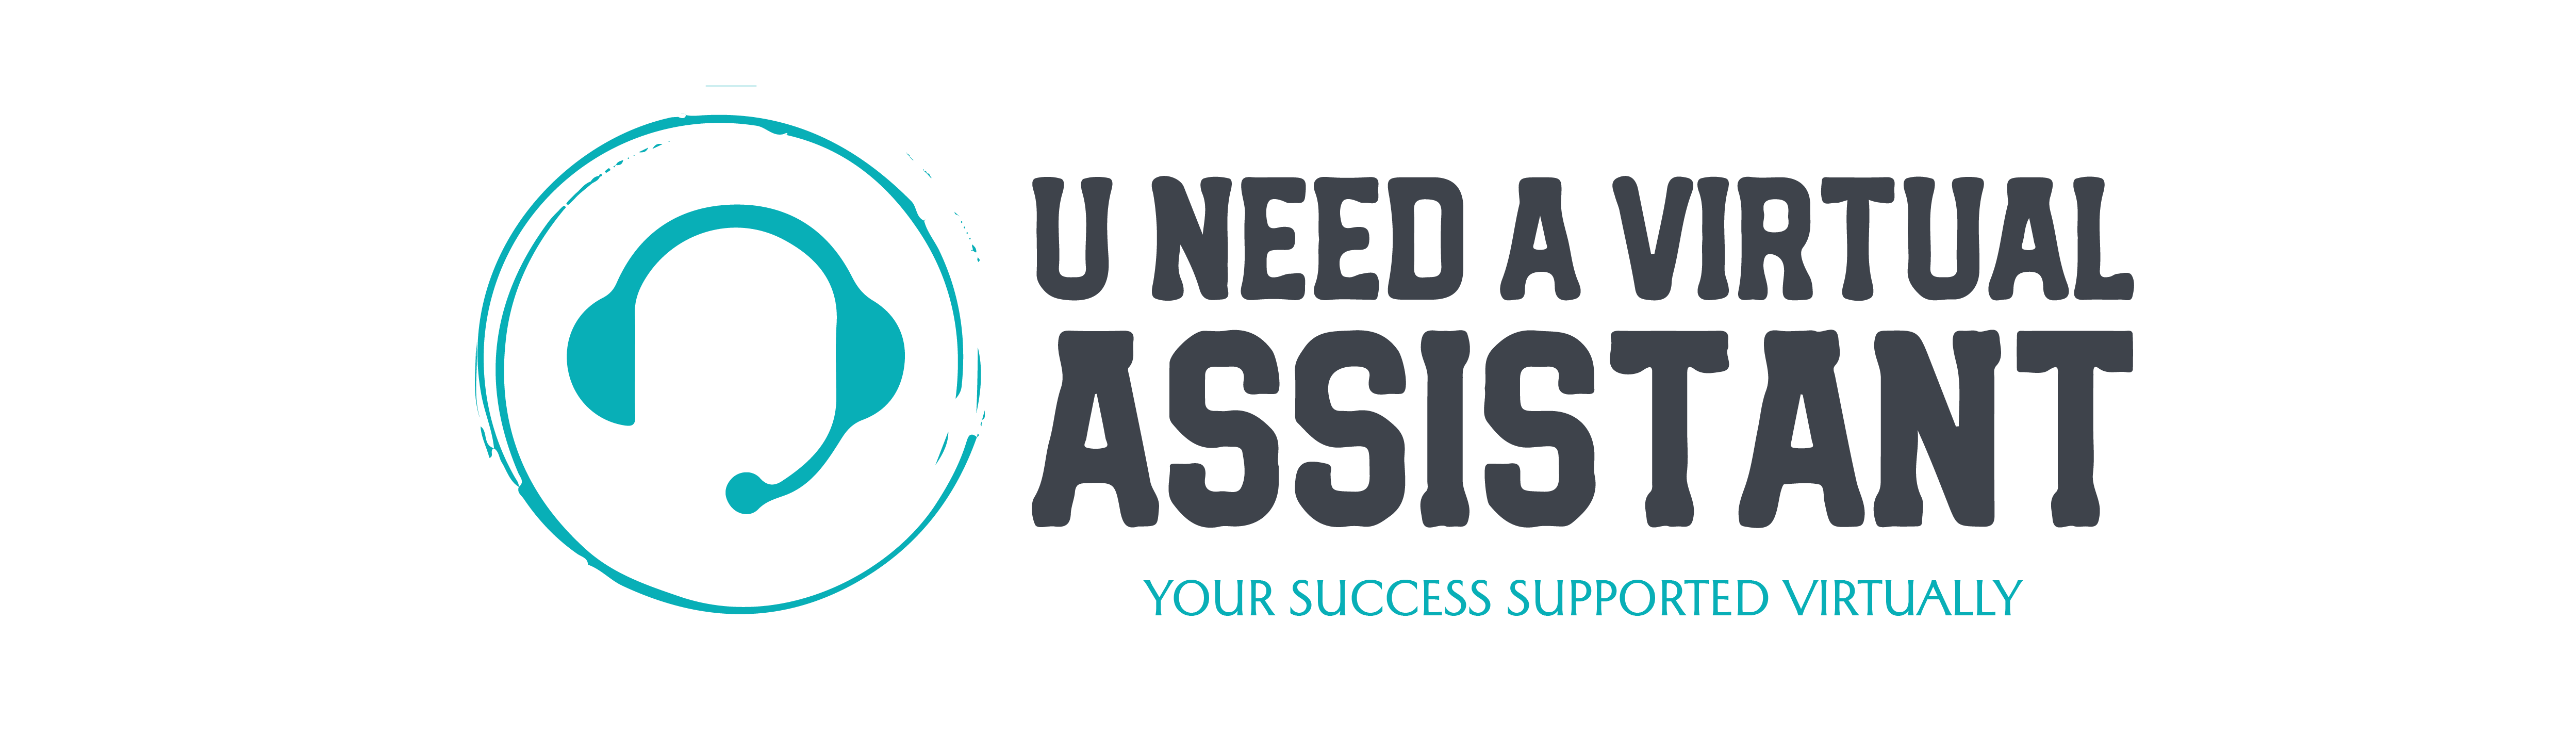 You need a virtual assistant